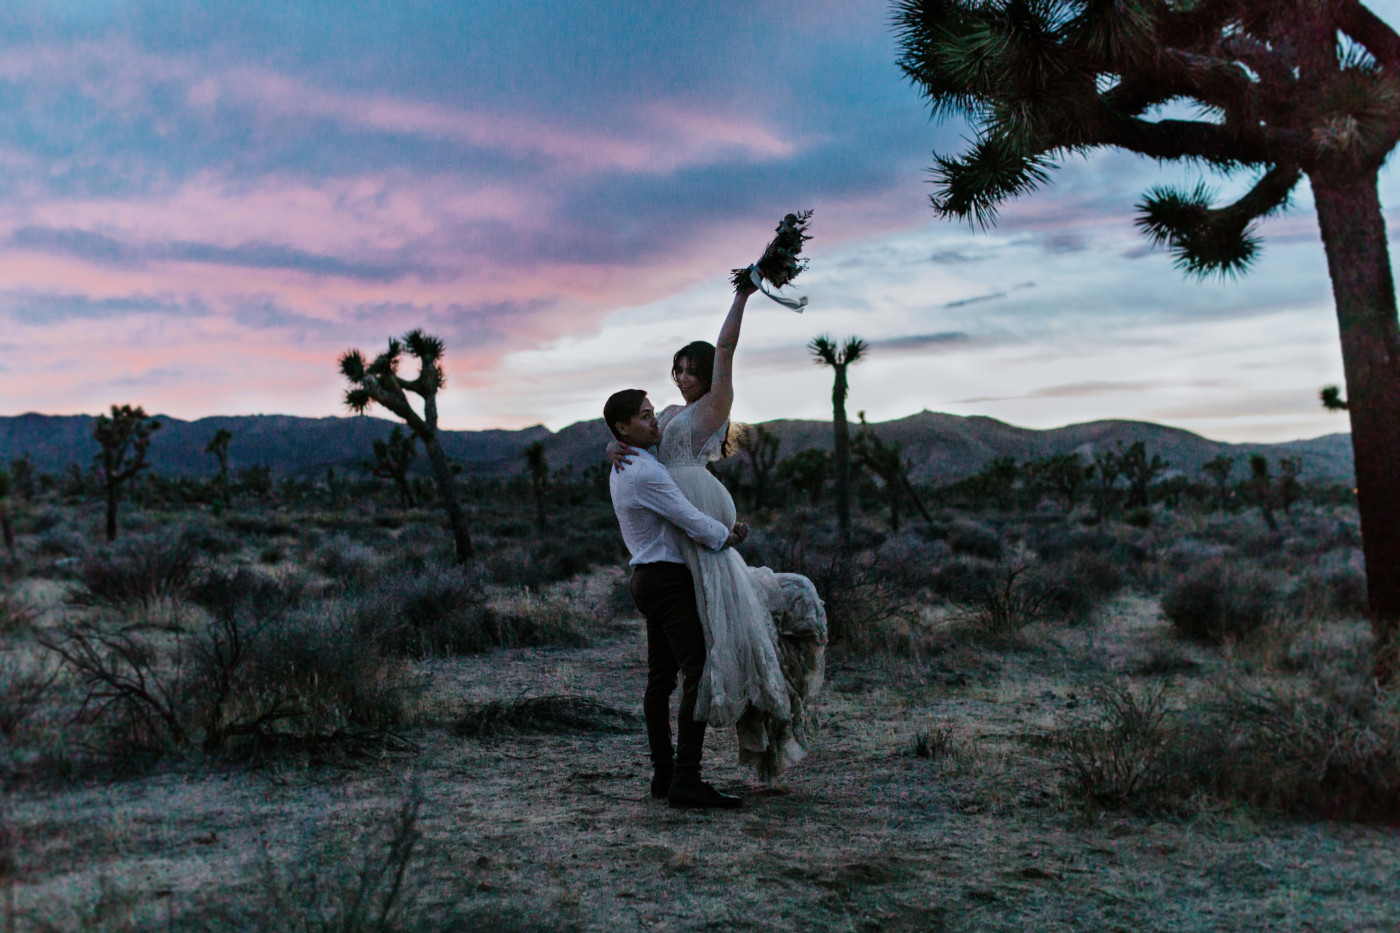 Zack picks up Shelby as she holds her flowers in the air during sunset at Joshua Tree.